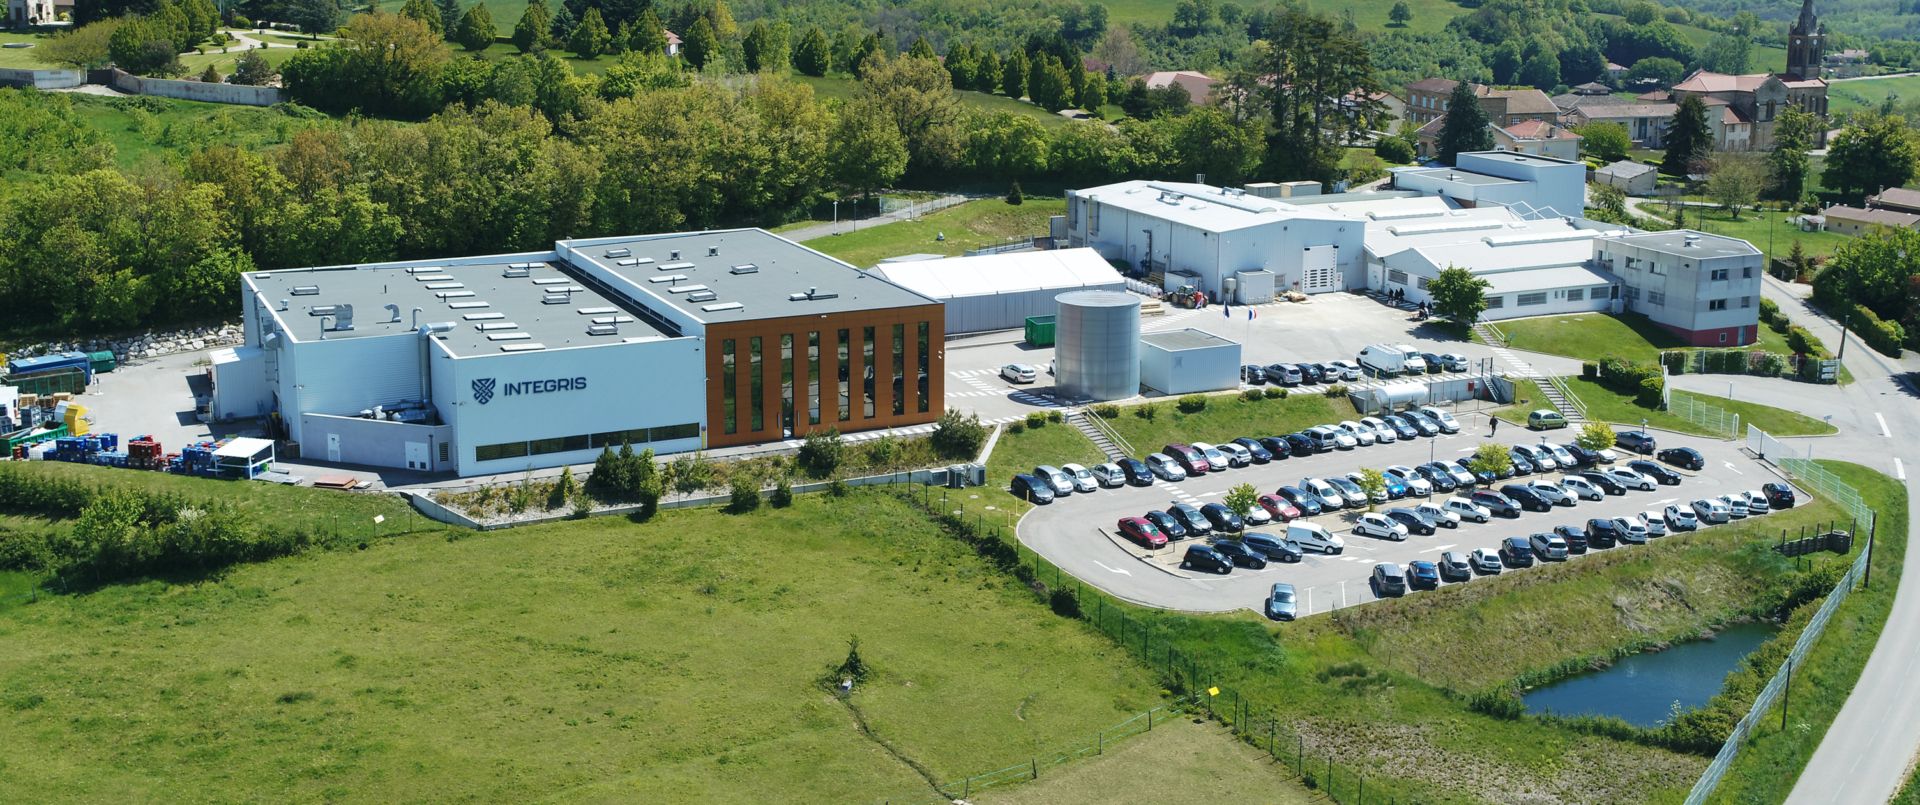 Integris Composites Facility in France